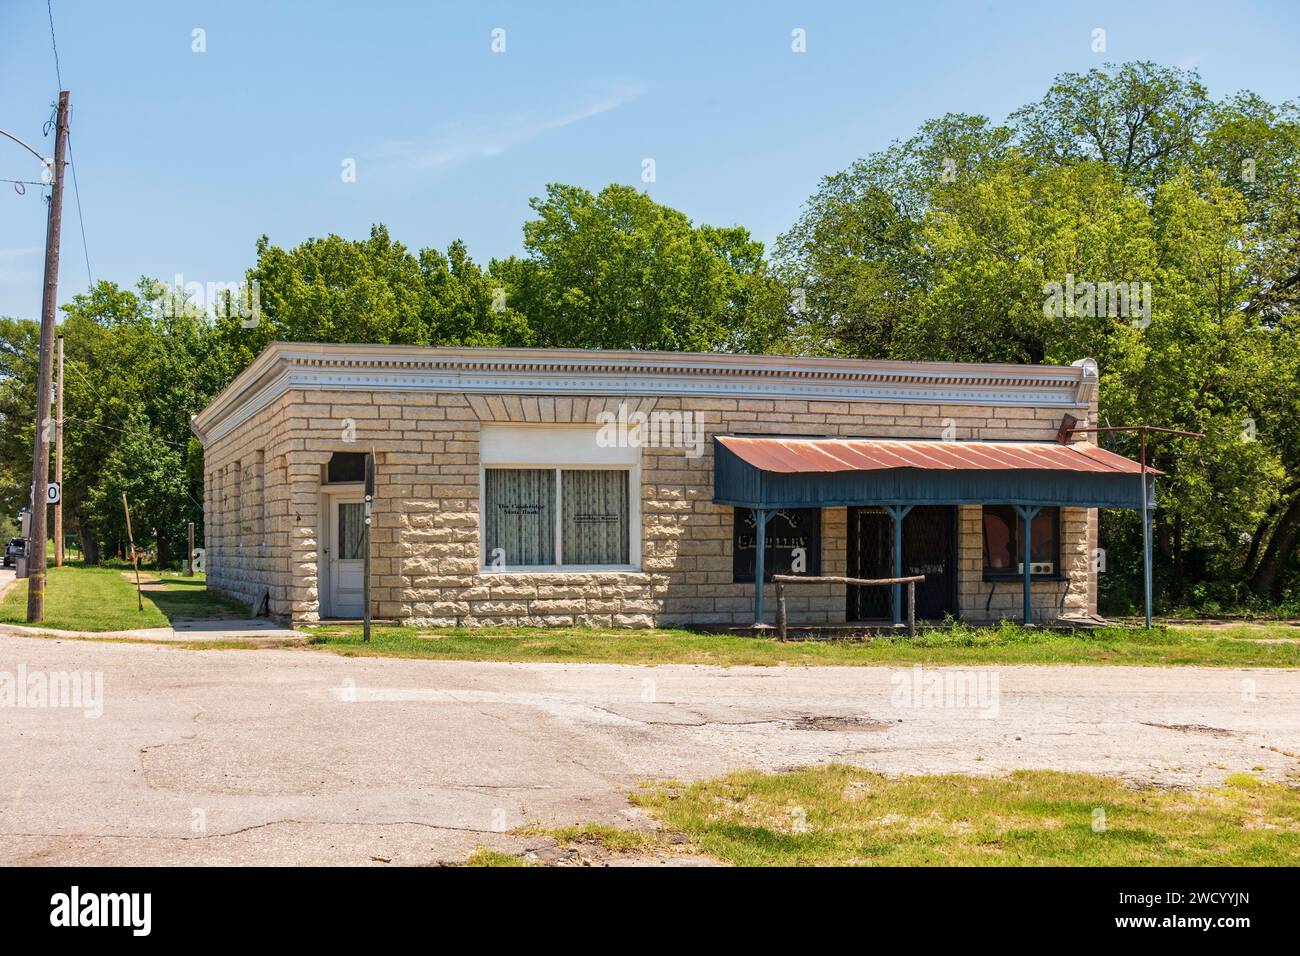 A saddlery business made of sandstone bricks with a rusty tin porch roof and a hitching post in Burden, Kansas, USA. Population 535. Stock Photo